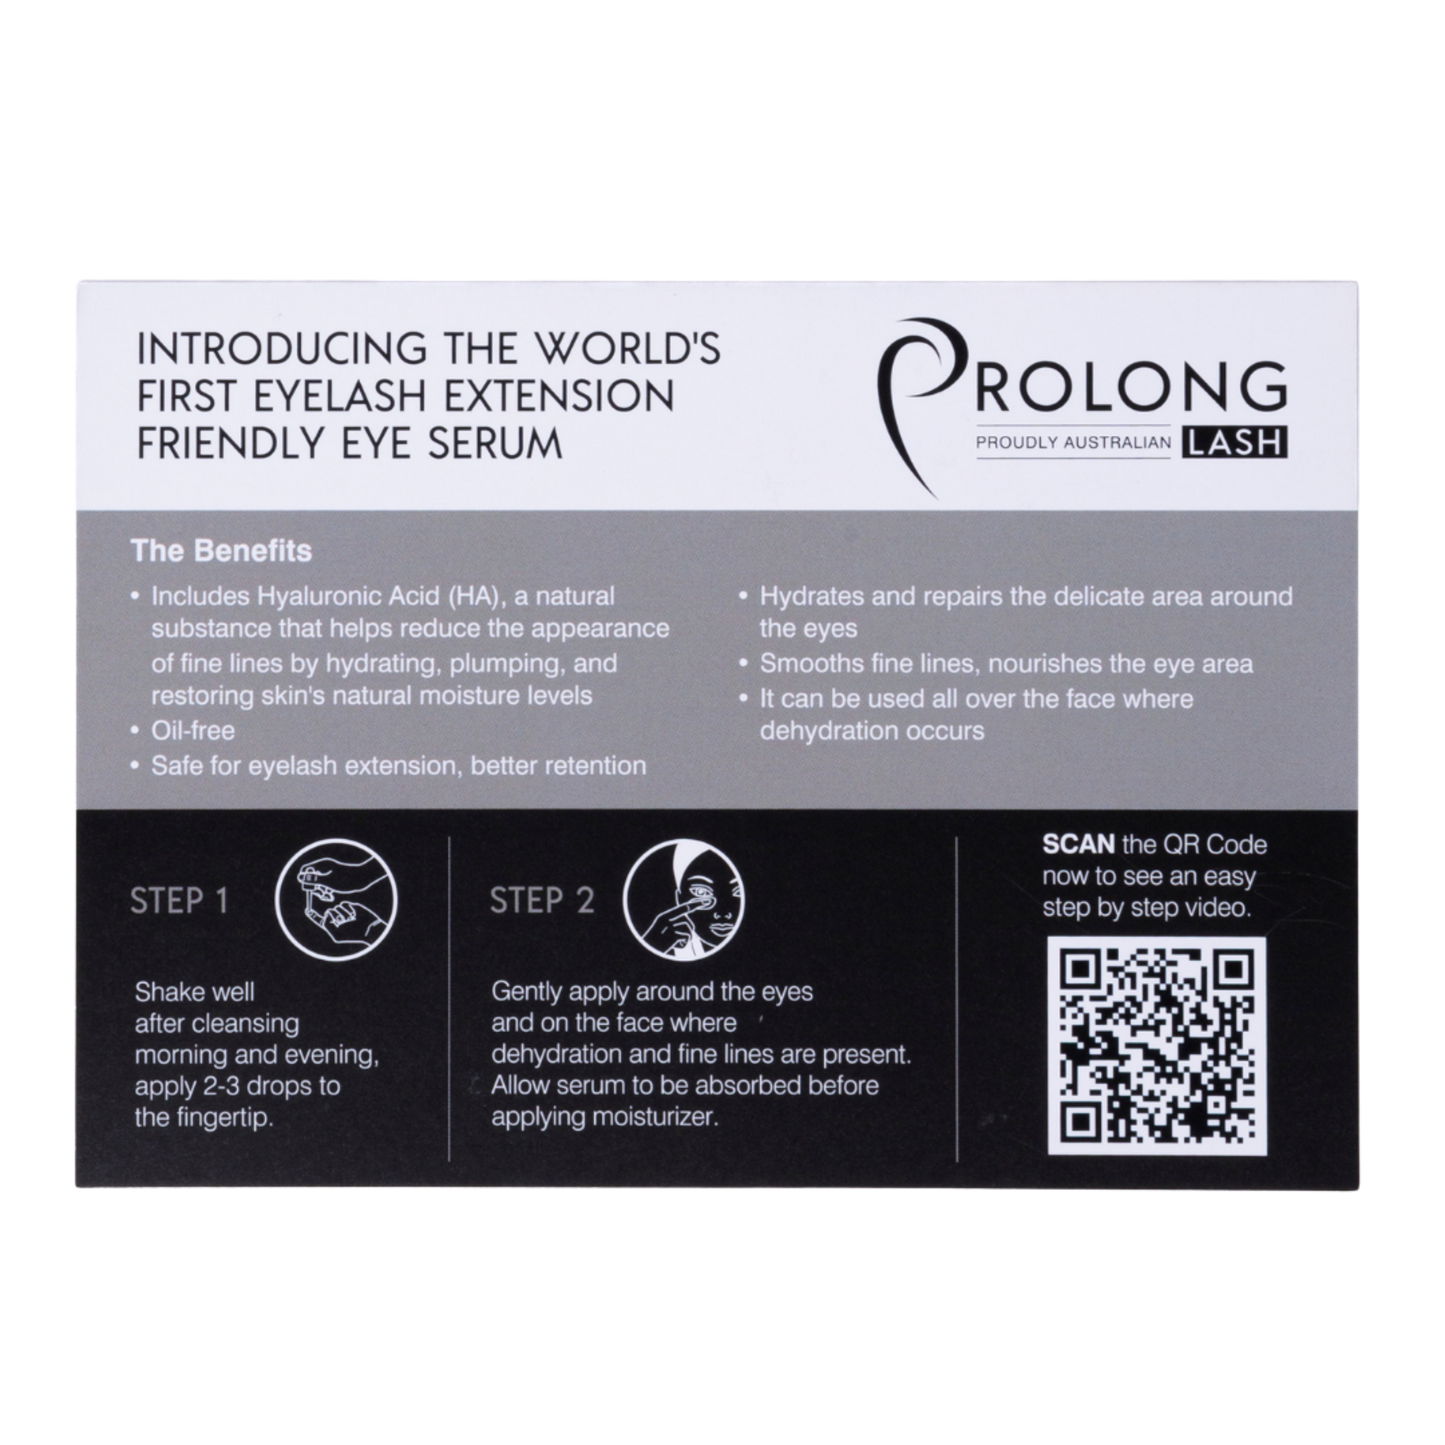 Postcard with information about how to use Prolong Lash Under Eye Hydrating Serum